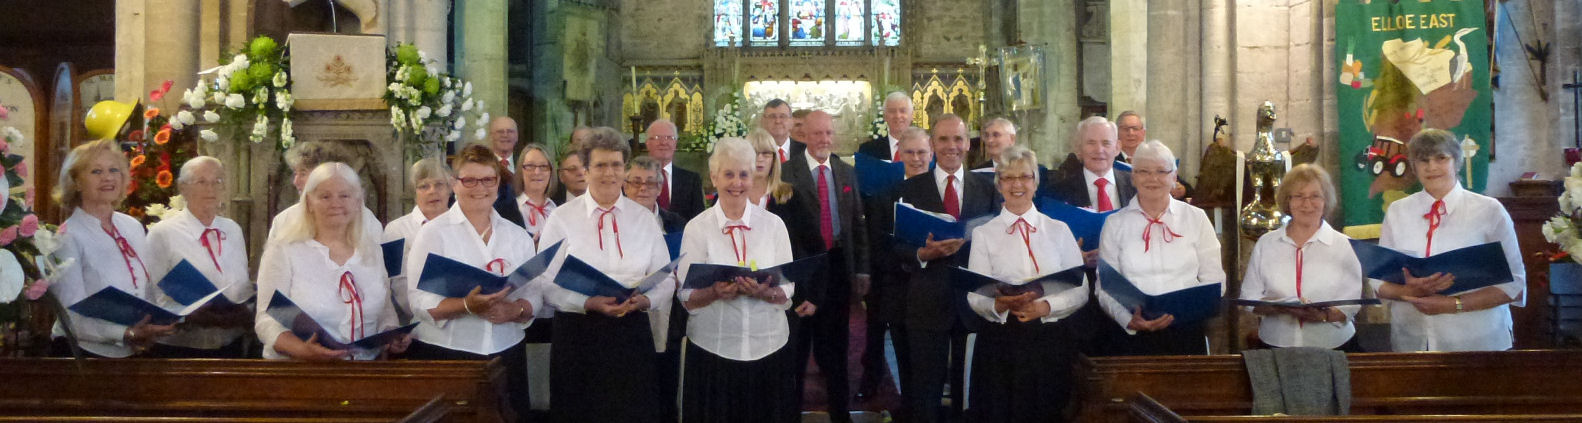 West Norfolk Singers at Long Sutton May 2014